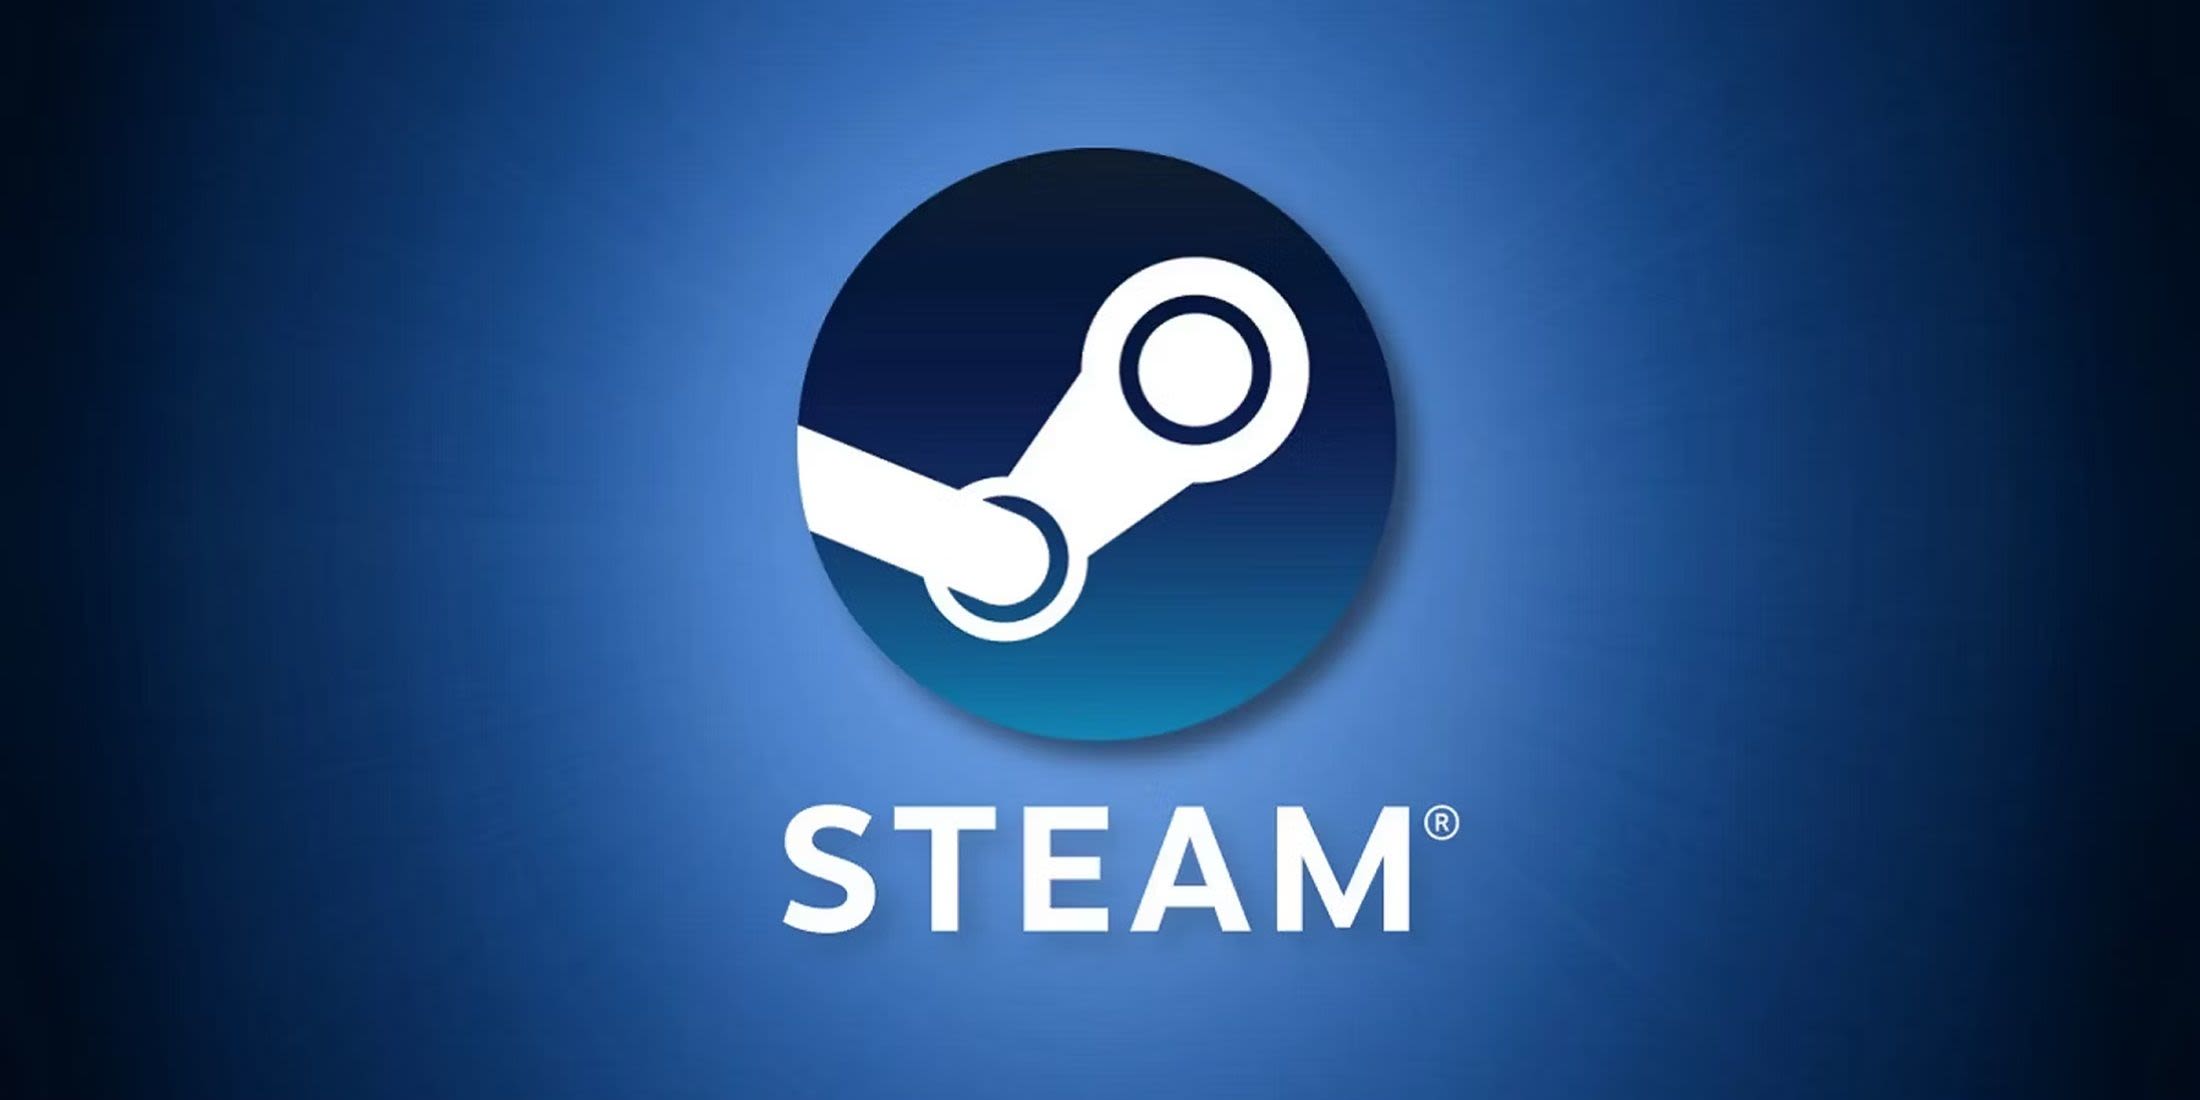 Steam Giving Away Free 2018 Game With 'Very Positive' Reviews